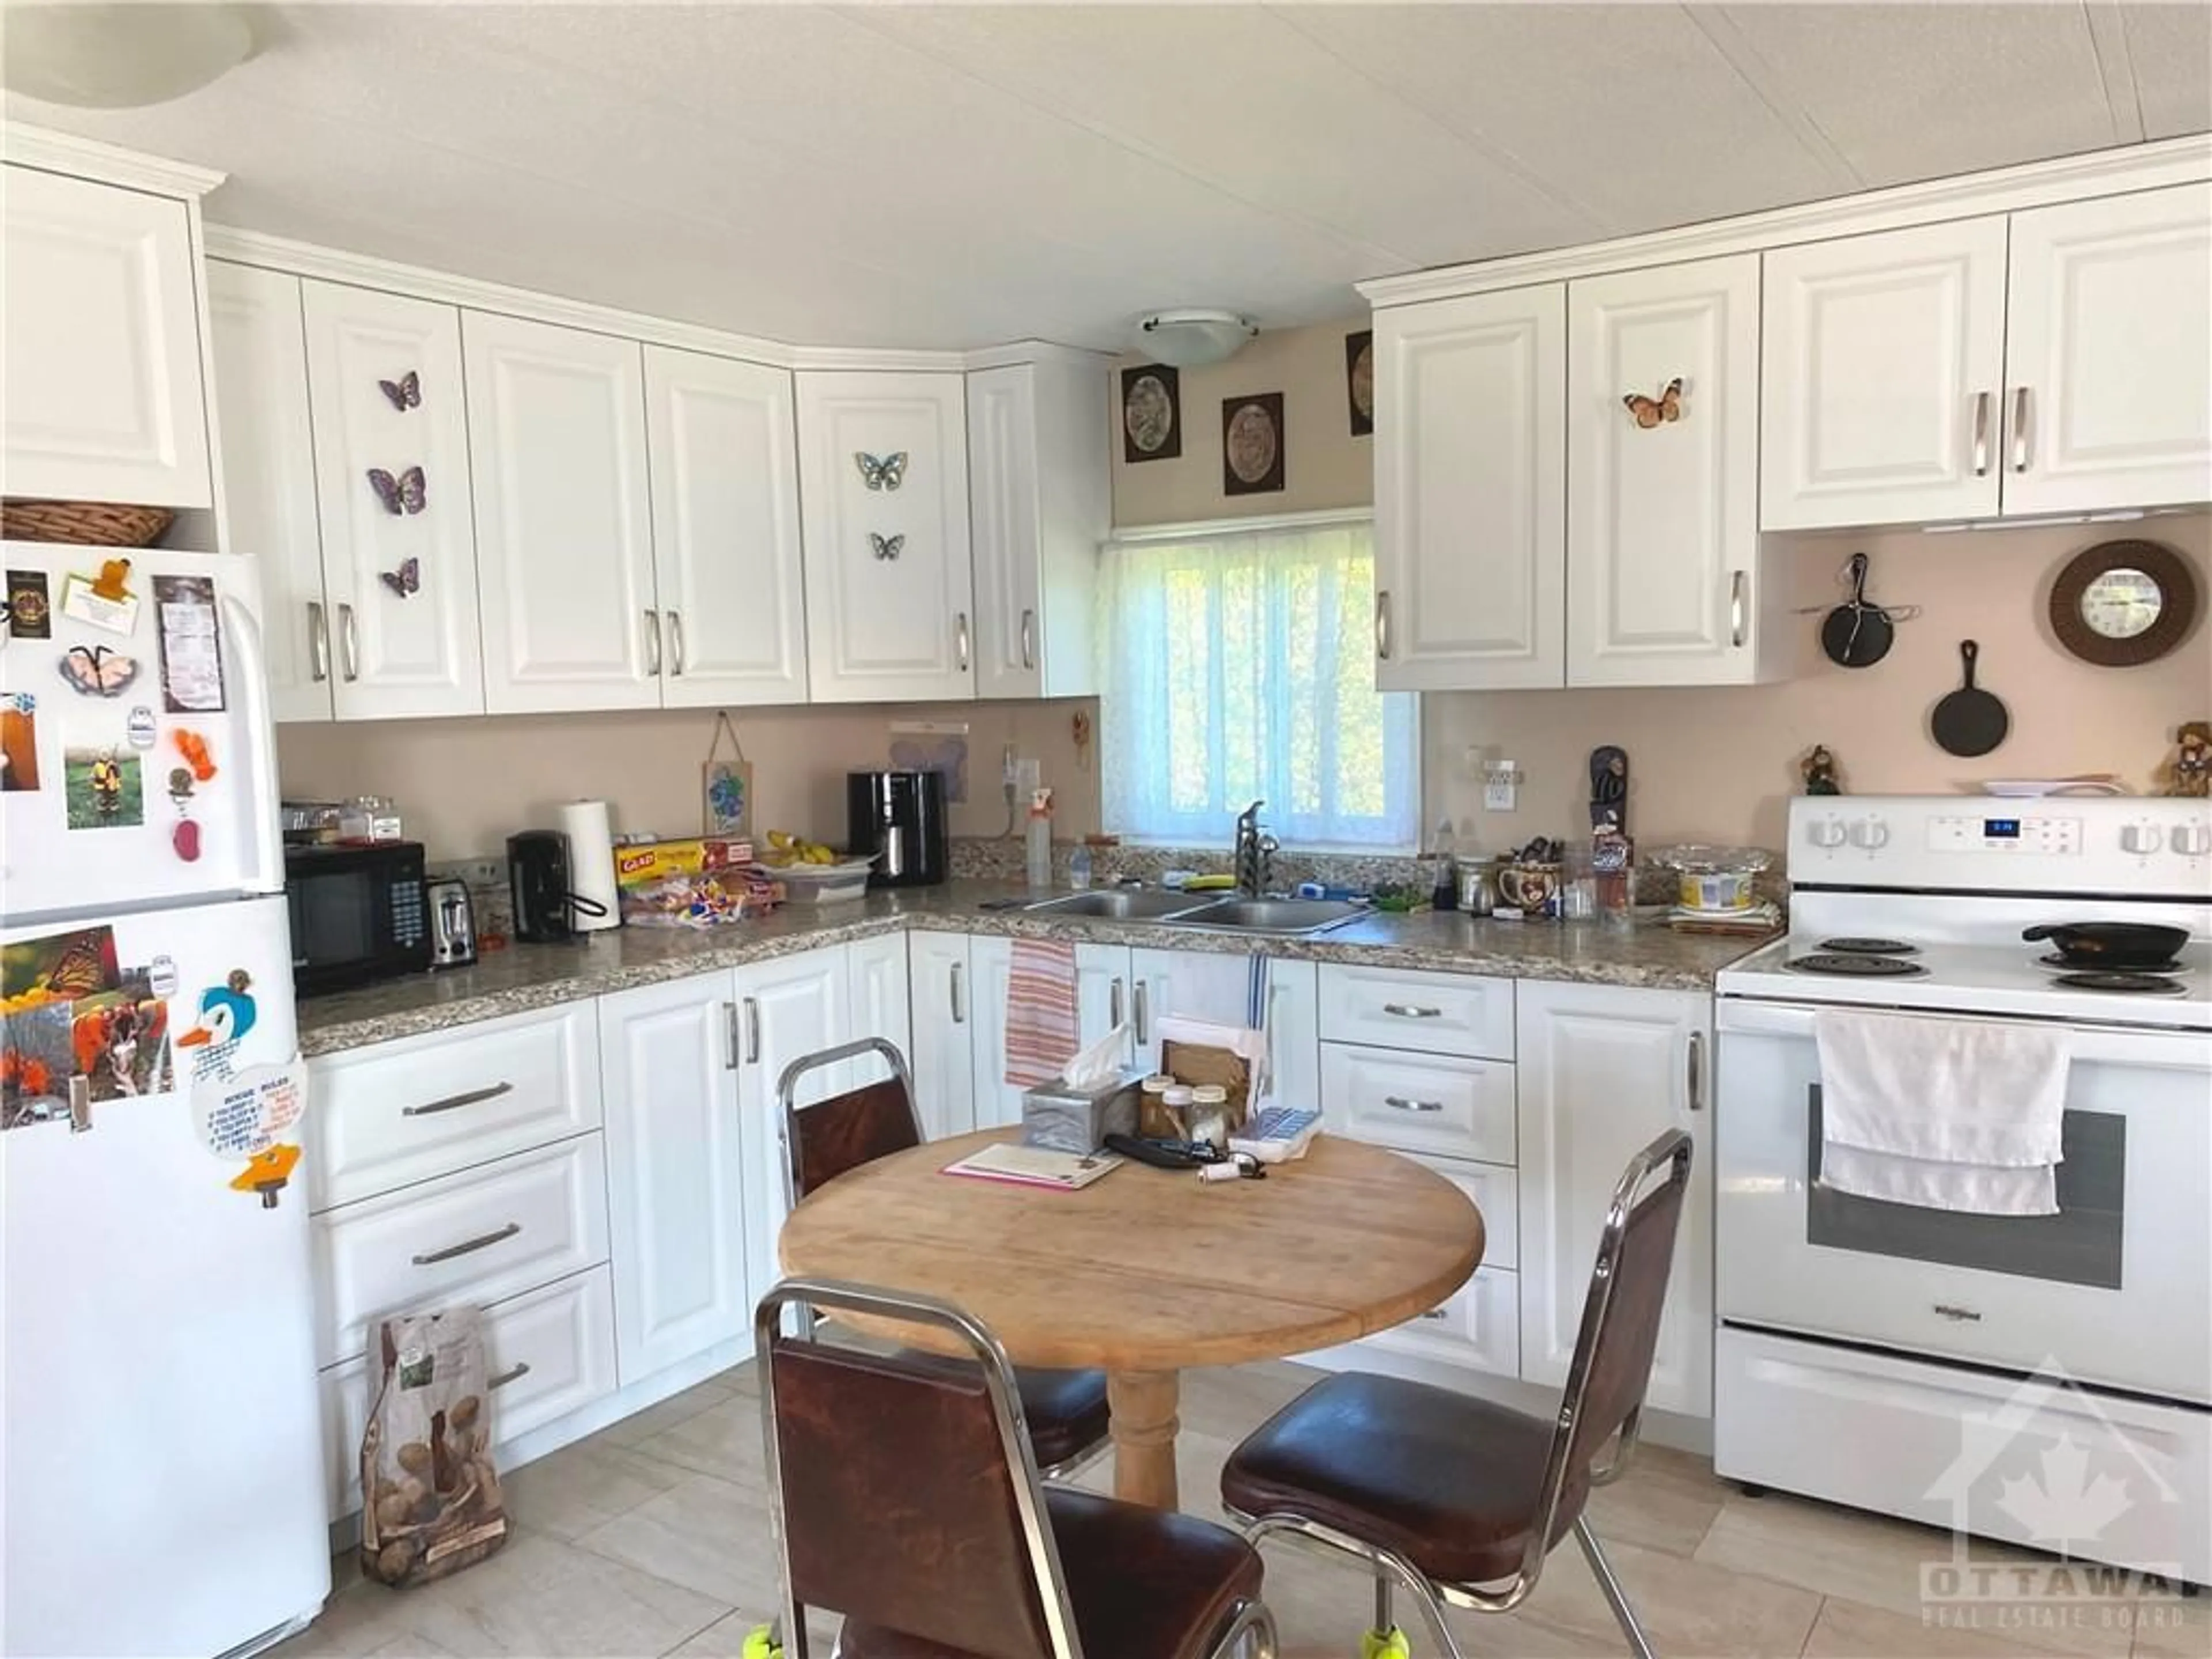 Kitchen for 402 29 Hwy #10, Smiths Falls Ontario K7A 4S5